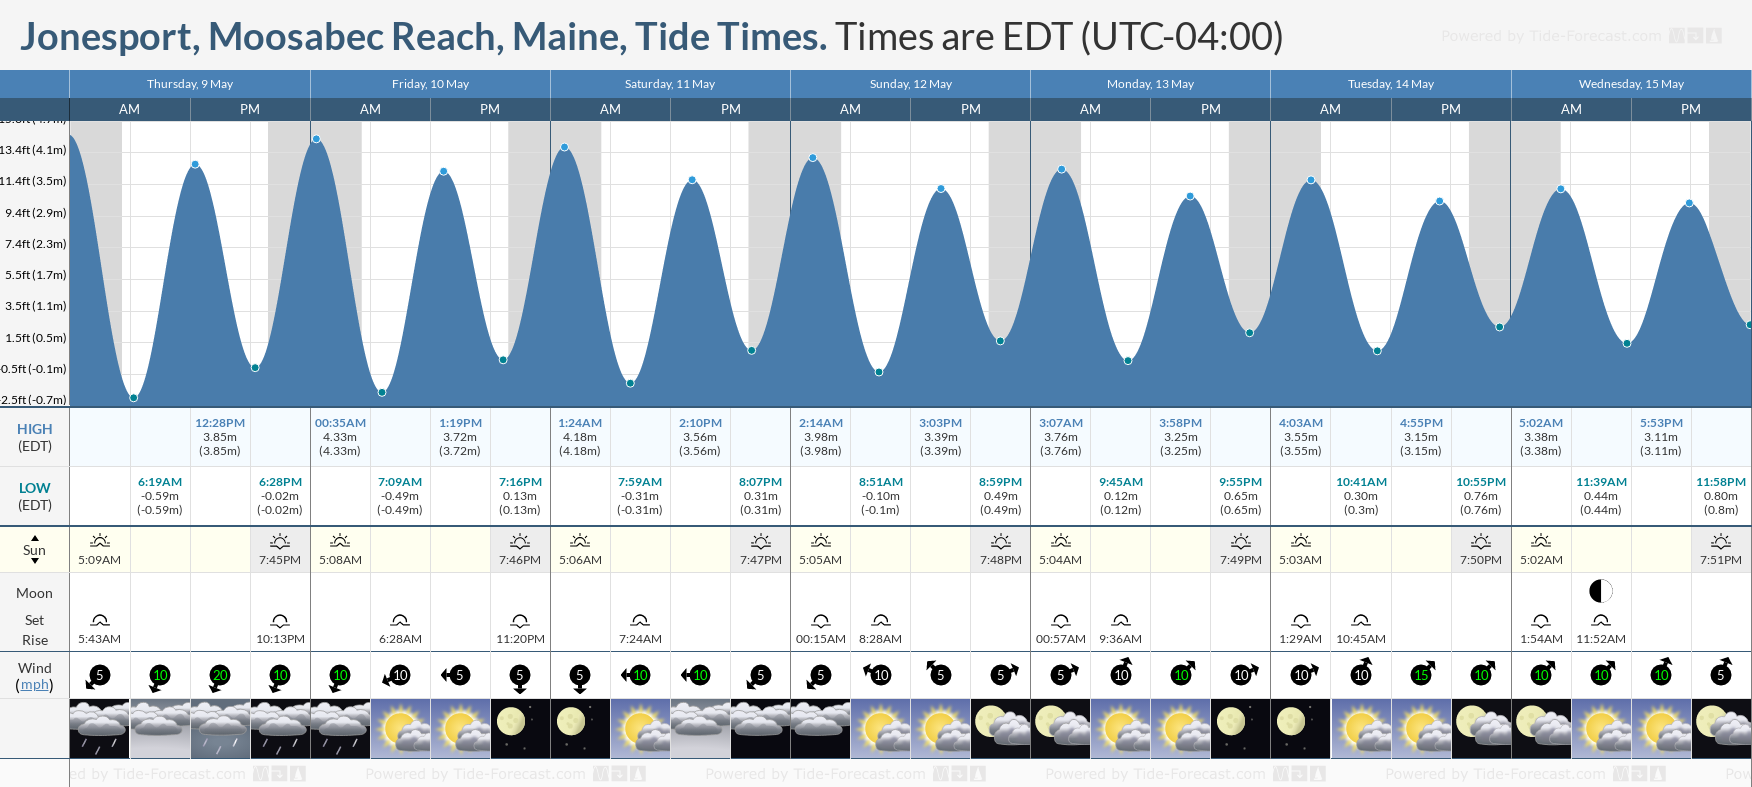 Jonesport, Moosabec Reach, Maine Tide Chart including high and low tide tide times for the next 7 days